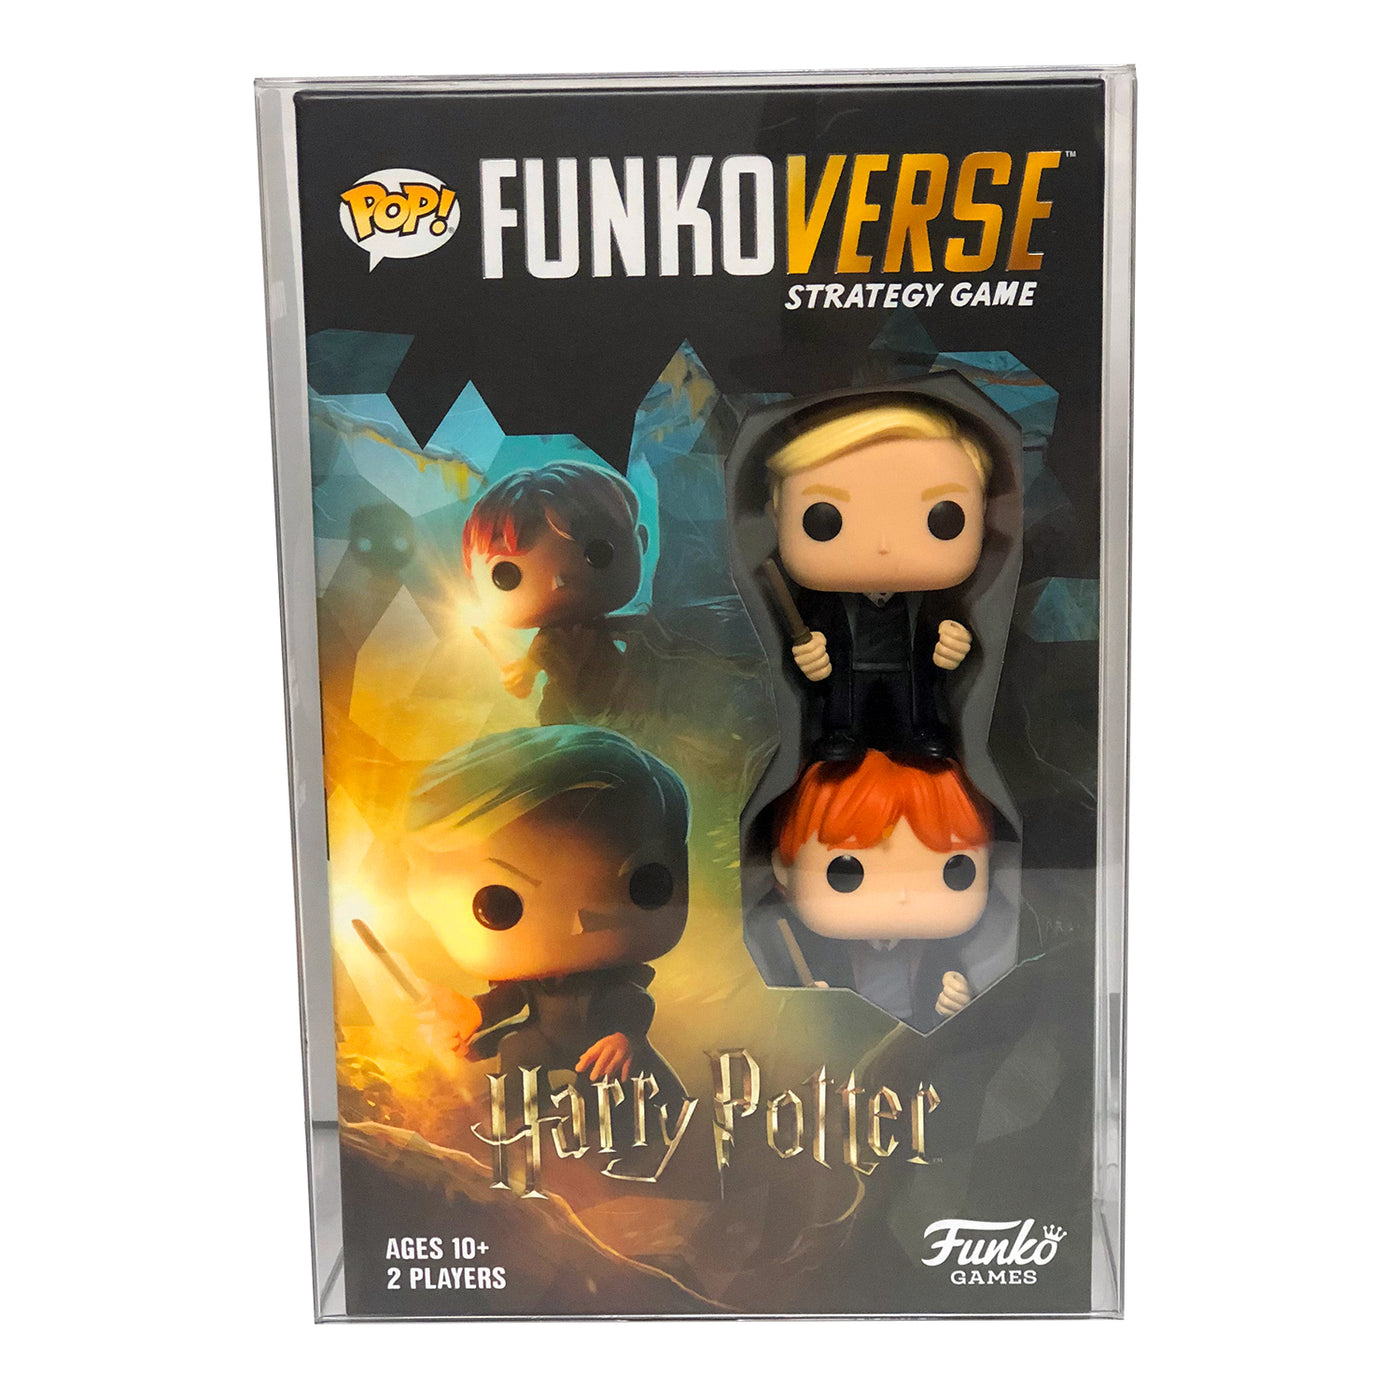 FUNKOVERSE Pop Protectors for Tall Funko Board Games, 50mm thick - Display Geek